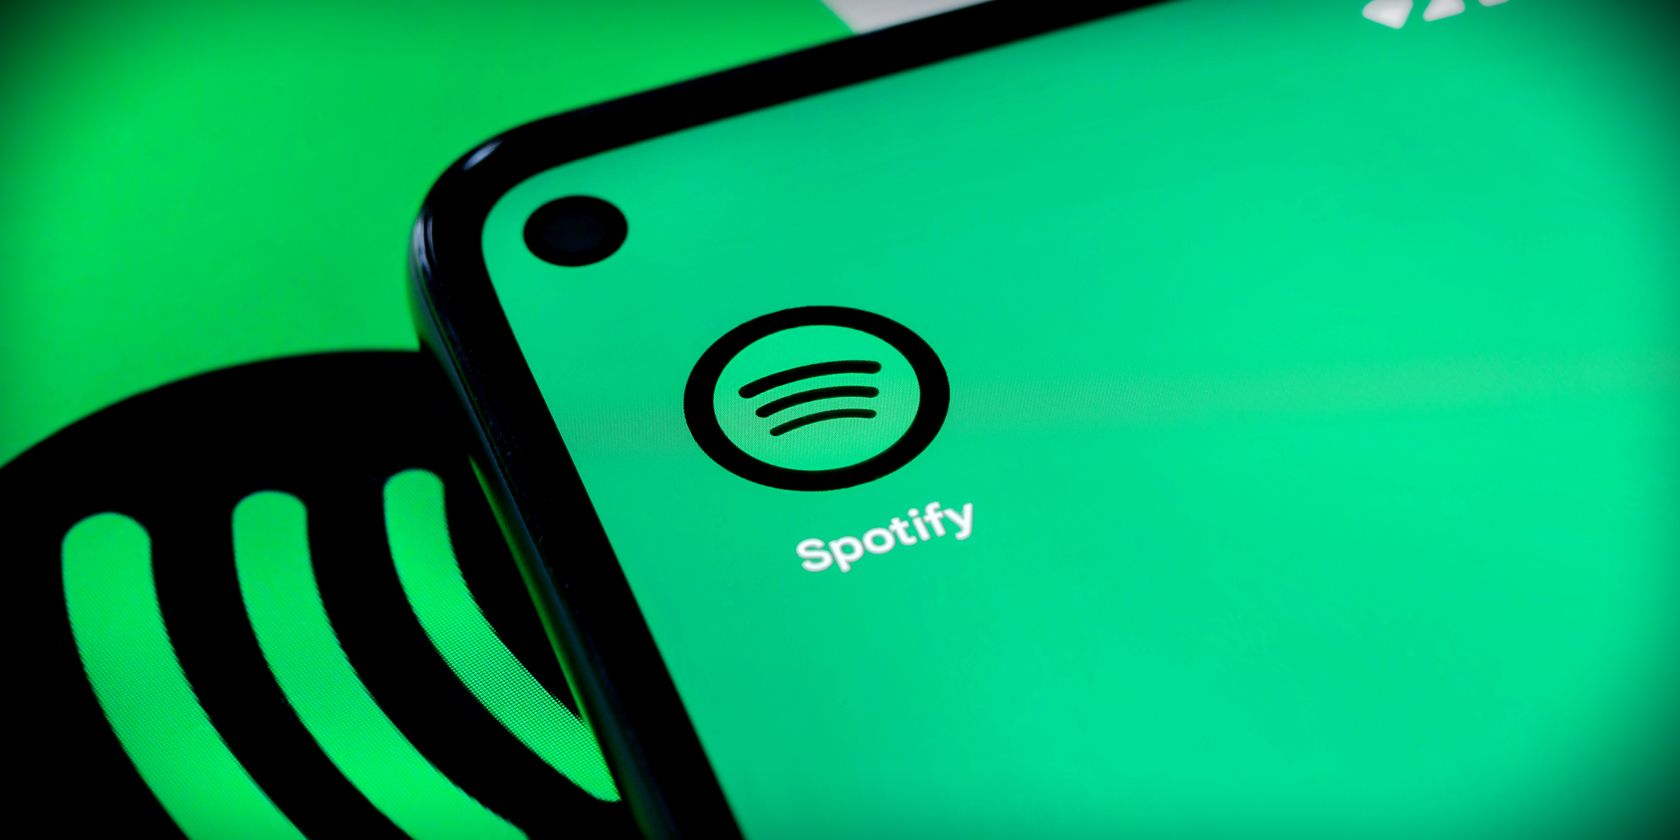 spotify logo on mobile phone feature